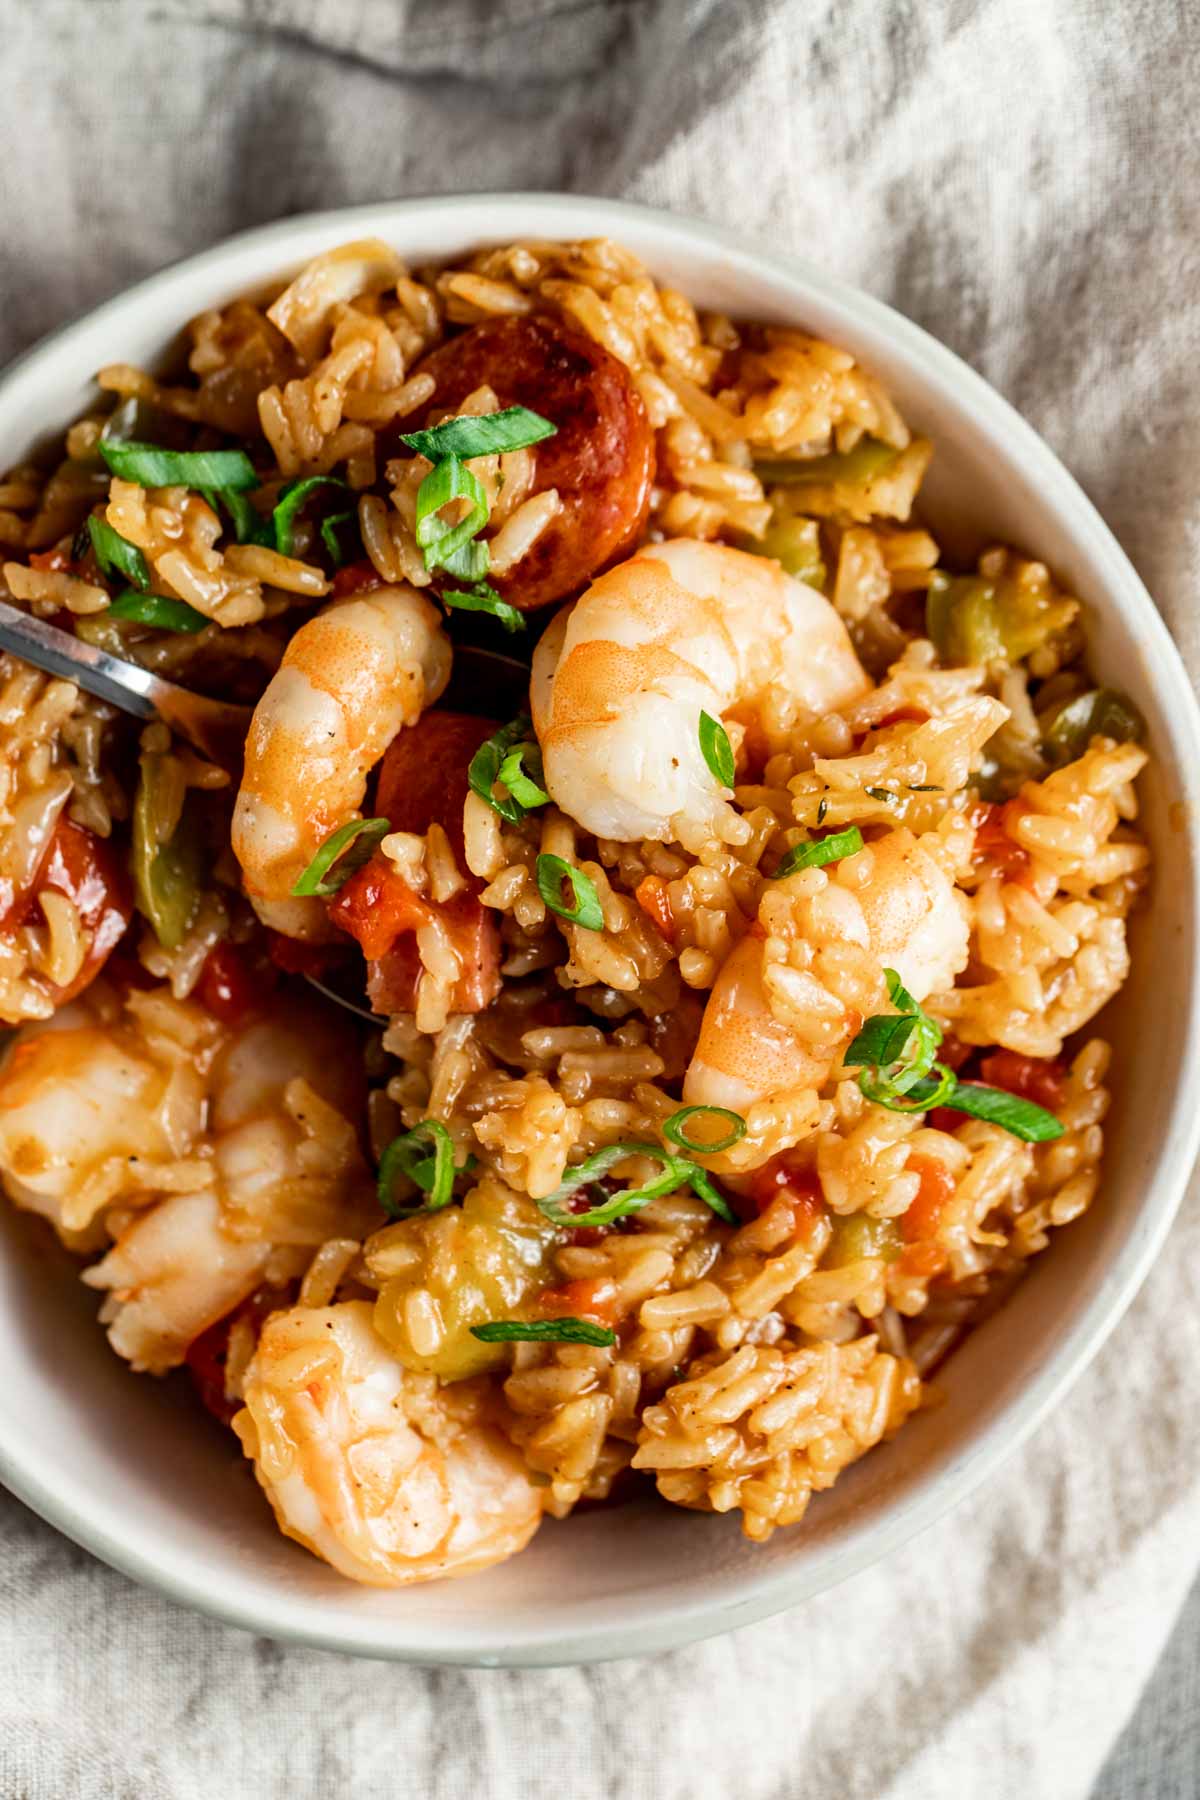 Jambalaya in a bowl, showcasing the plump shrimp, and topped with green onions.